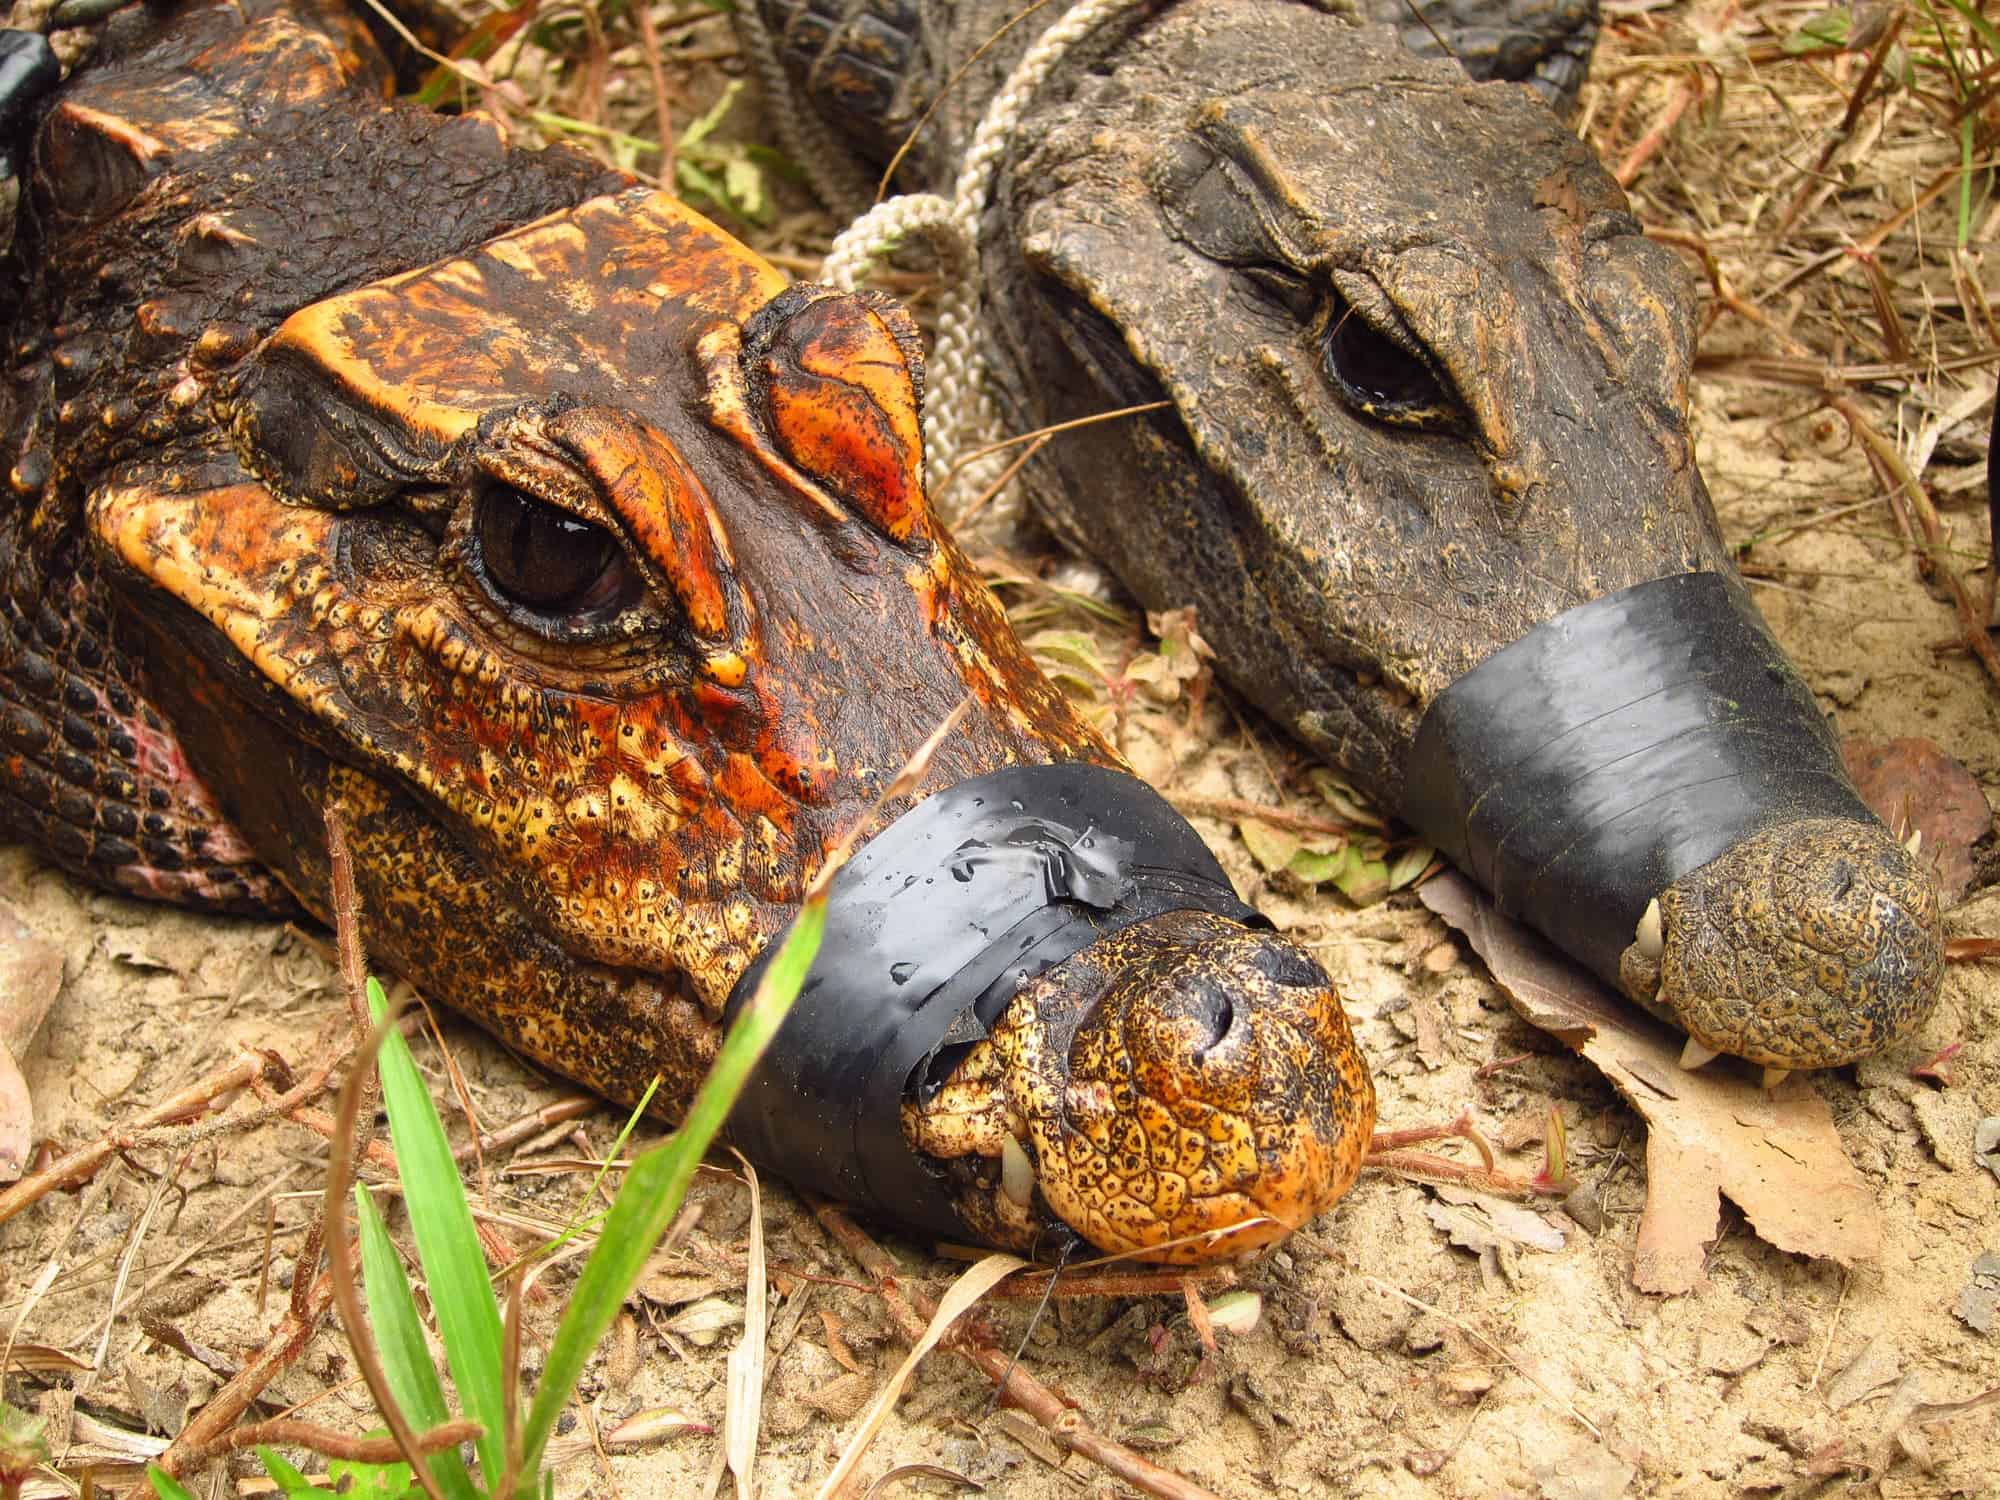 Side-by-side comparisson between cave-dwelling (left) and surface-dwelling African dwarf crocodiles. Credit: Olivier Testa.